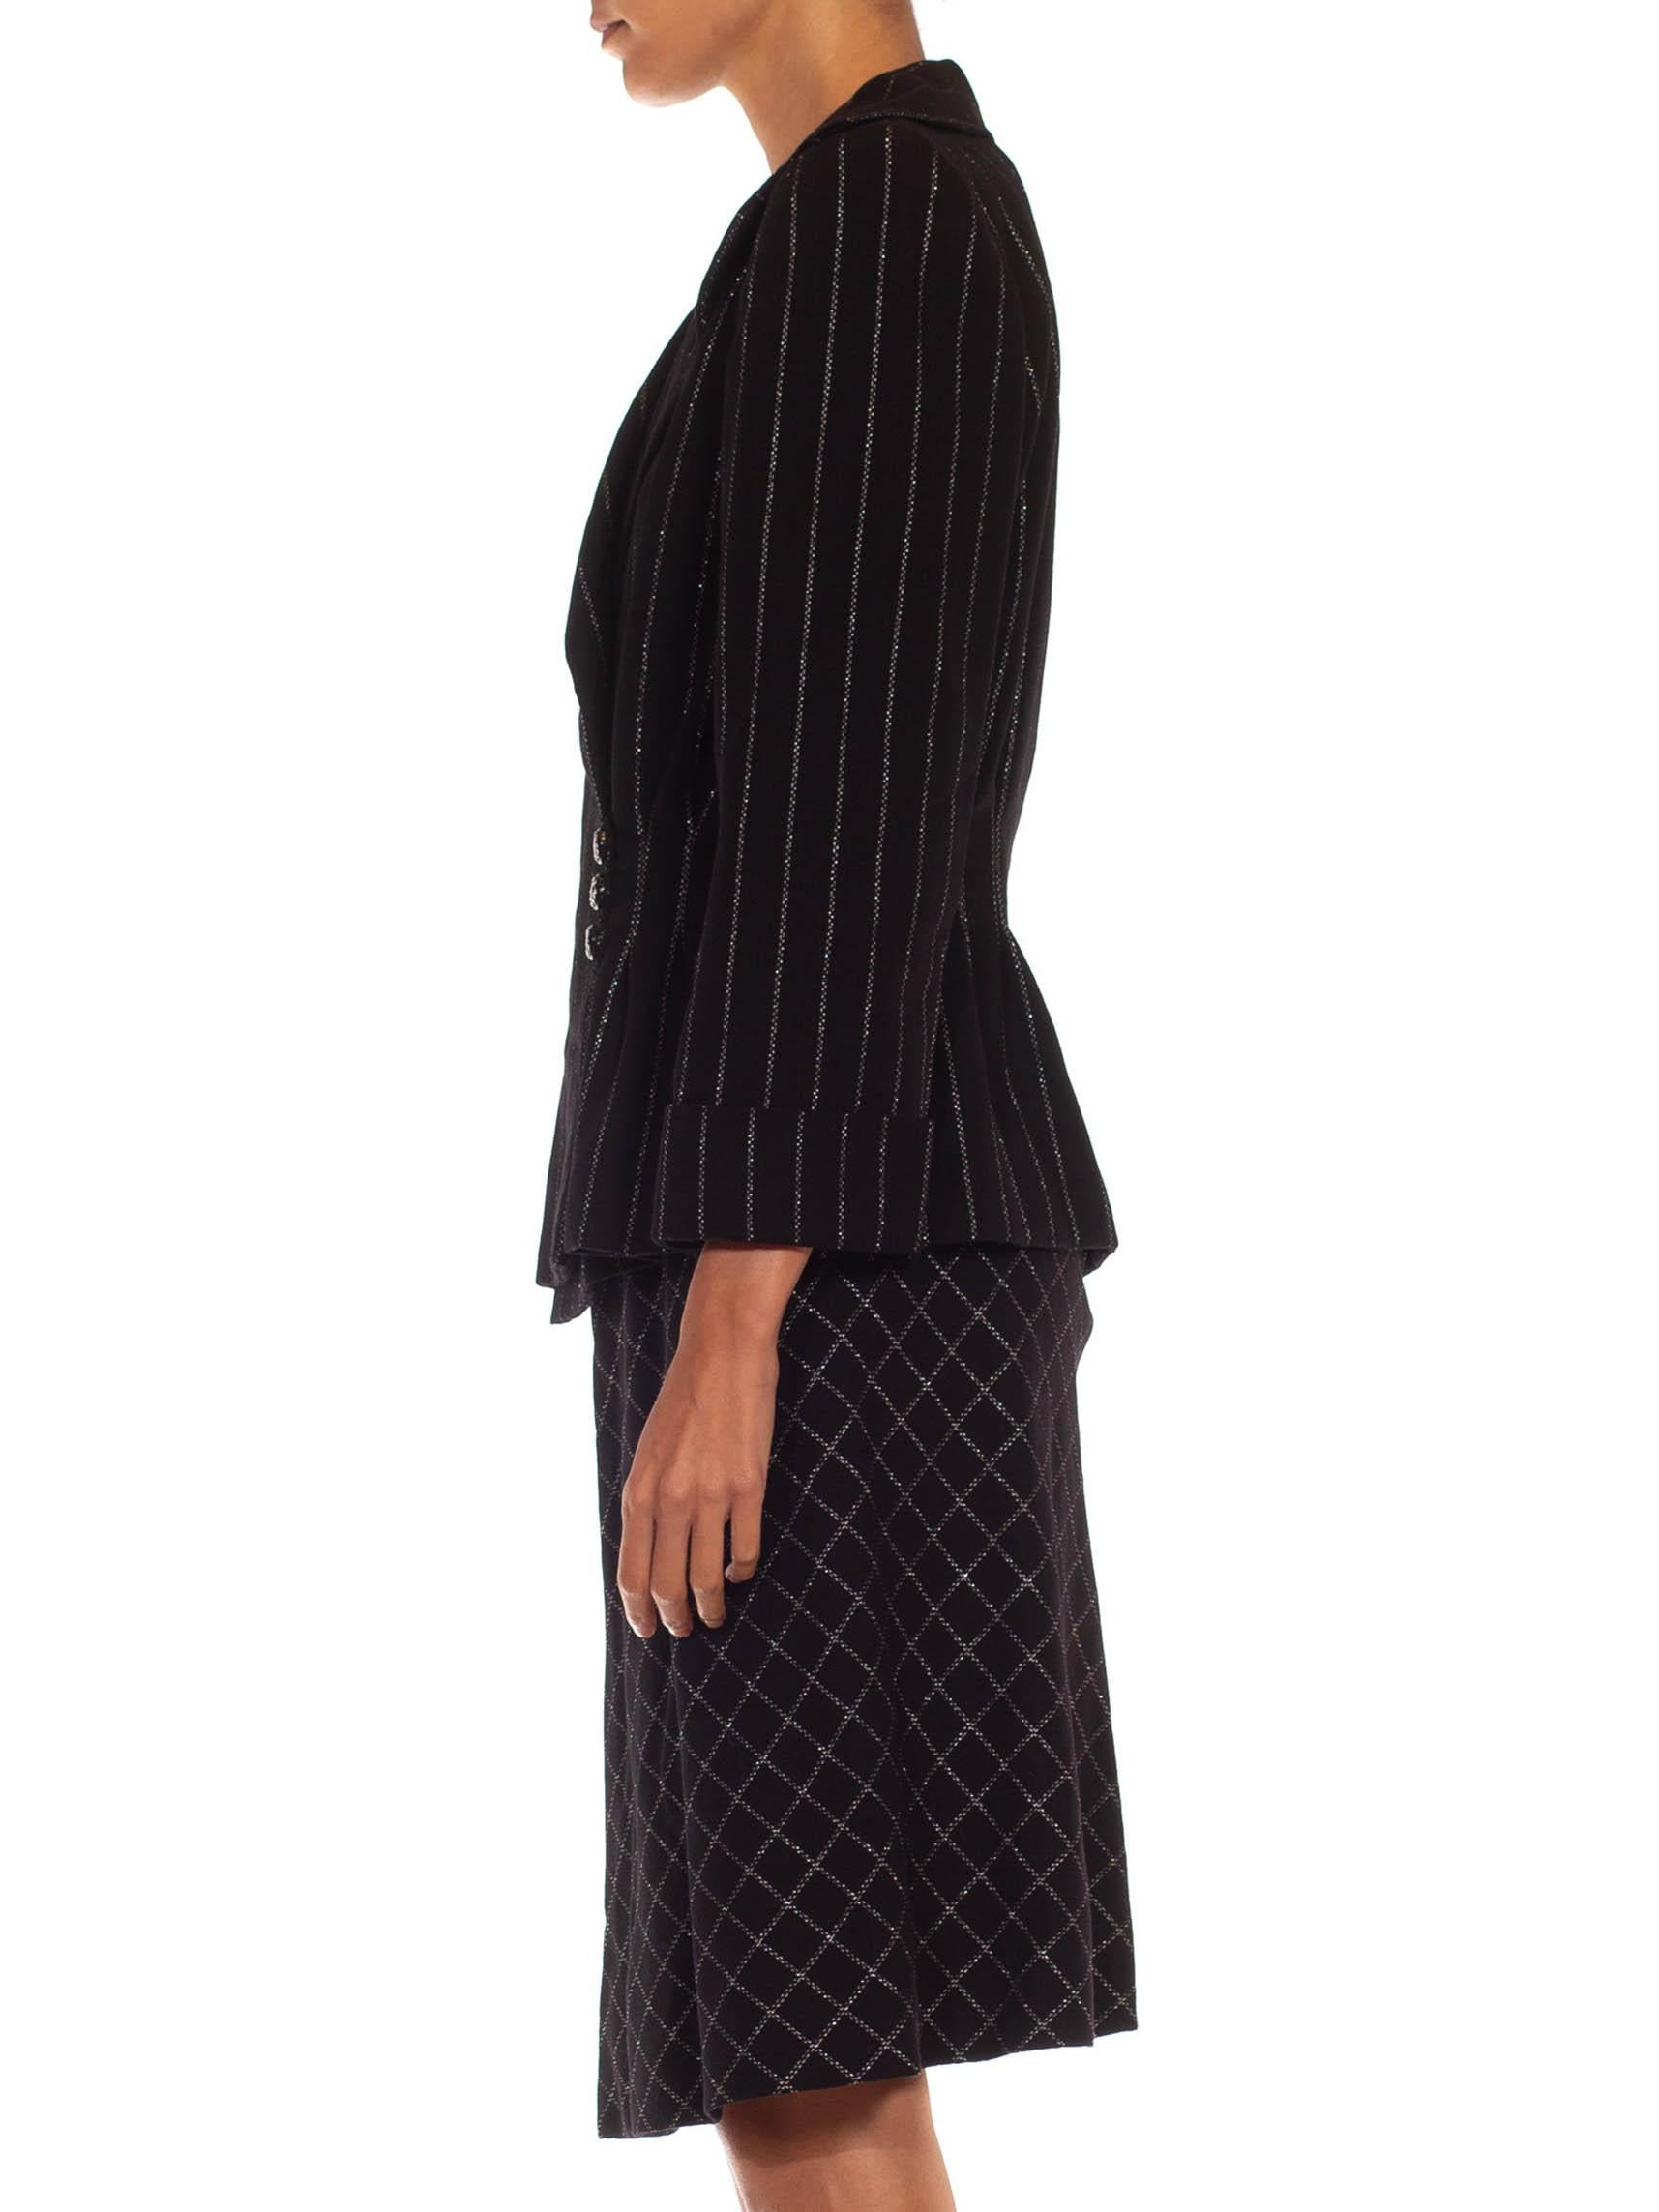 1970S PAULINE TRIGERE Black Silver Lamé Bias Skirt Suit With Silk Lining In Excellent Condition For Sale In New York, NY